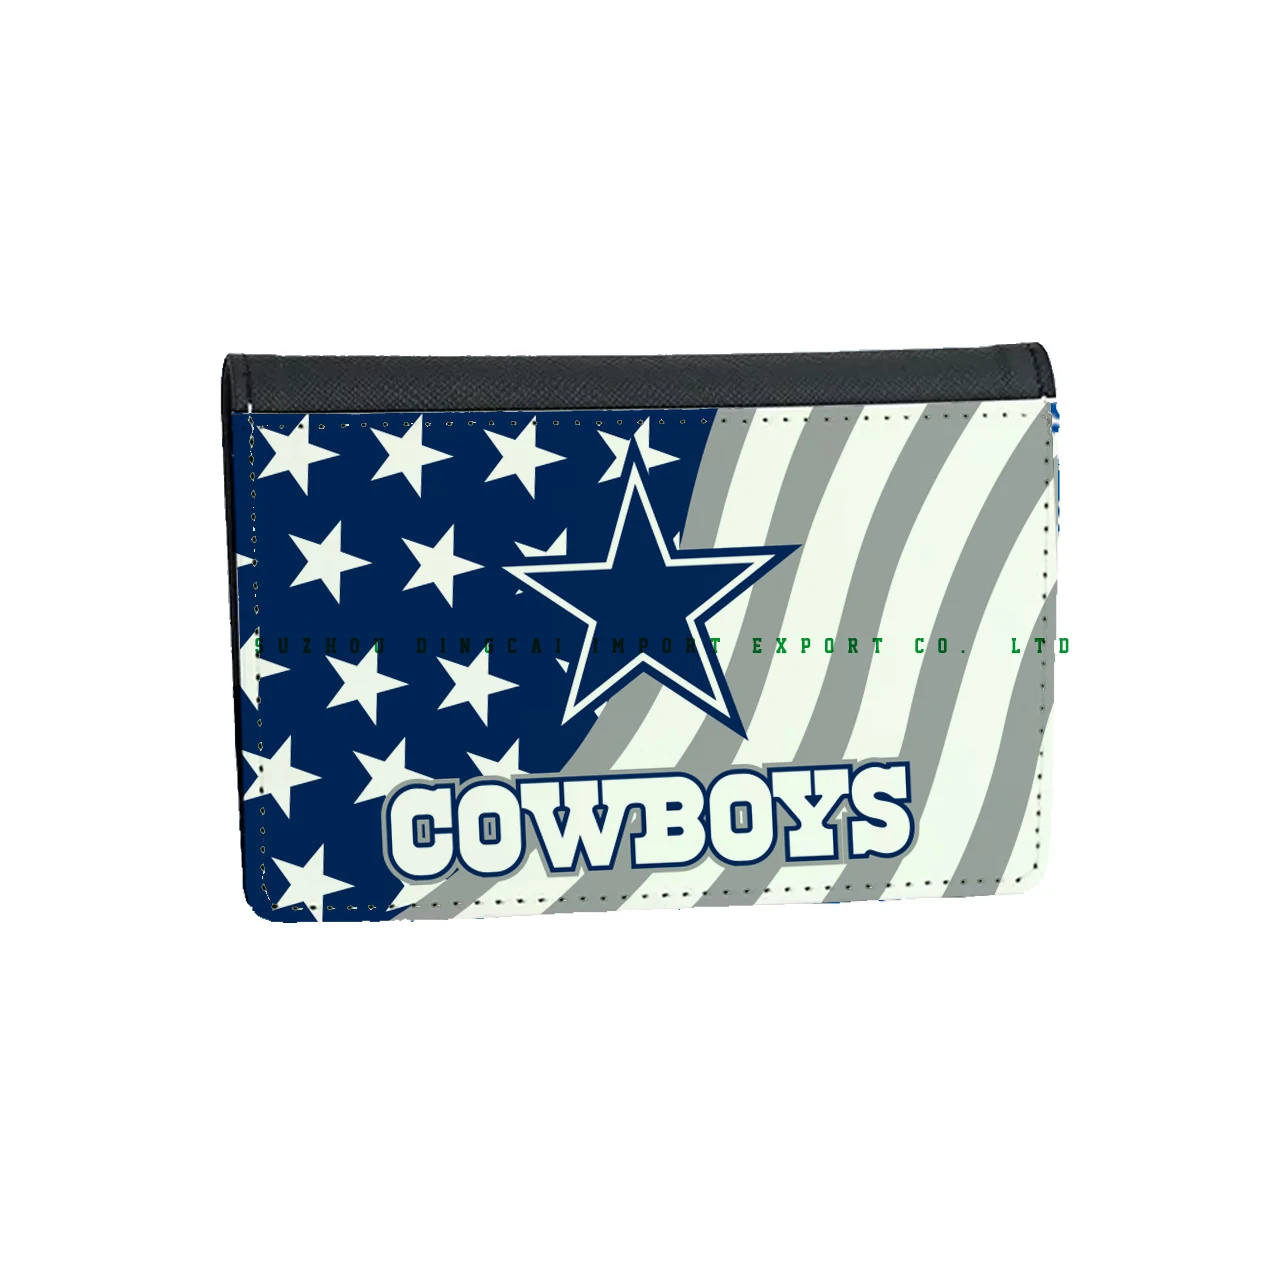 Custom 14.6X9cm Passport Cover  PU Leather Dallas Cowboys  Passport Holder Cover Case with Card Slot